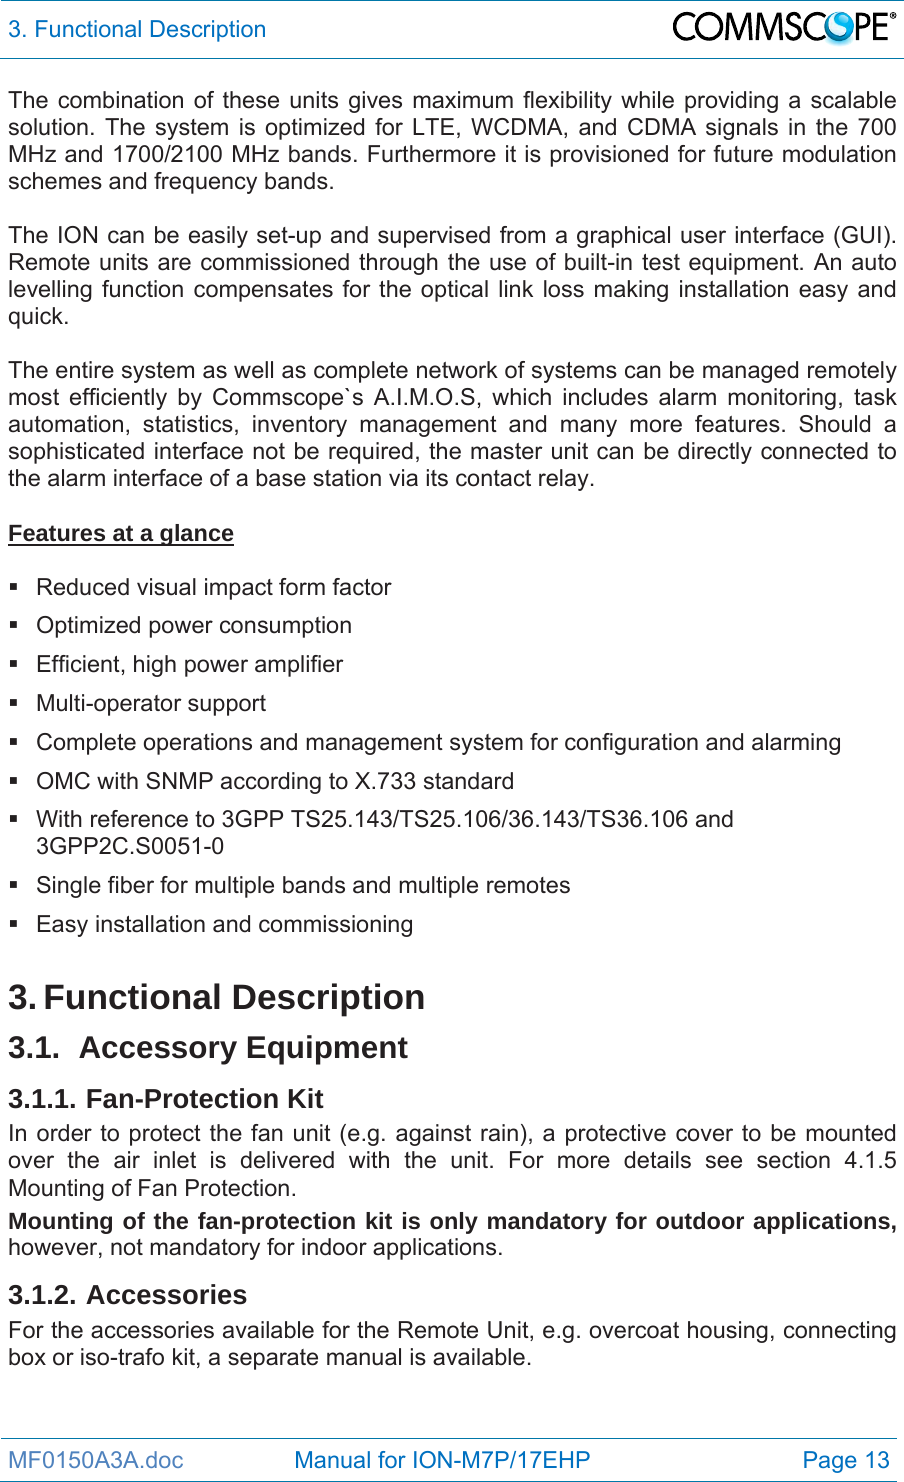 3. Functional Description  MF0150A3A.doc                 Manual for ION-M7P/17EHP  Page 13 The combination of these units gives maximum flexibility while providing a scalable solution. The system is optimized for LTE, WCDMA, and CDMA signals in the 700 MHz and 1700/2100 MHz bands. Furthermore it is provisioned for future modulation schemes and frequency bands.  The ION can be easily set-up and supervised from a graphical user interface (GUI). Remote units are commissioned through the use of built-in test equipment. An auto levelling function compensates for the optical link loss making installation easy and quick.  The entire system as well as complete network of systems can be managed remotely most efficiently by Commscope`s A.I.M.O.S, which includes alarm monitoring, task automation, statistics, inventory management and many more features. Should a sophisticated interface not be required, the master unit can be directly connected to the alarm interface of a base station via its contact relay.  Features at a glance    Reduced visual impact form factor   Optimized power consumption   Efficient, high power amplifier  Multi-operator support   Complete operations and management system for configuration and alarming   OMC with SNMP according to X.733 standard   With reference to 3GPP TS25.143/TS25.106/36.143/TS36.106 and 3GPP2C.S0051-0   Single fiber for multiple bands and multiple remotes  Easy installation and commissioning  3. Functional Description 3.1. Accessory Equipment 3.1.1. Fan-Protection Kit In order to protect the fan unit (e.g. against rain), a protective cover to be mounted over the air inlet is delivered with the unit. For more details see section 4.1.5 Mounting of Fan Protection.  Mounting of the fan-protection kit is only mandatory for outdoor applications, however, not mandatory for indoor applications. 3.1.2. Accessories For the accessories available for the Remote Unit, e.g. overcoat housing, connecting box or iso-trafo kit, a separate manual is available. 